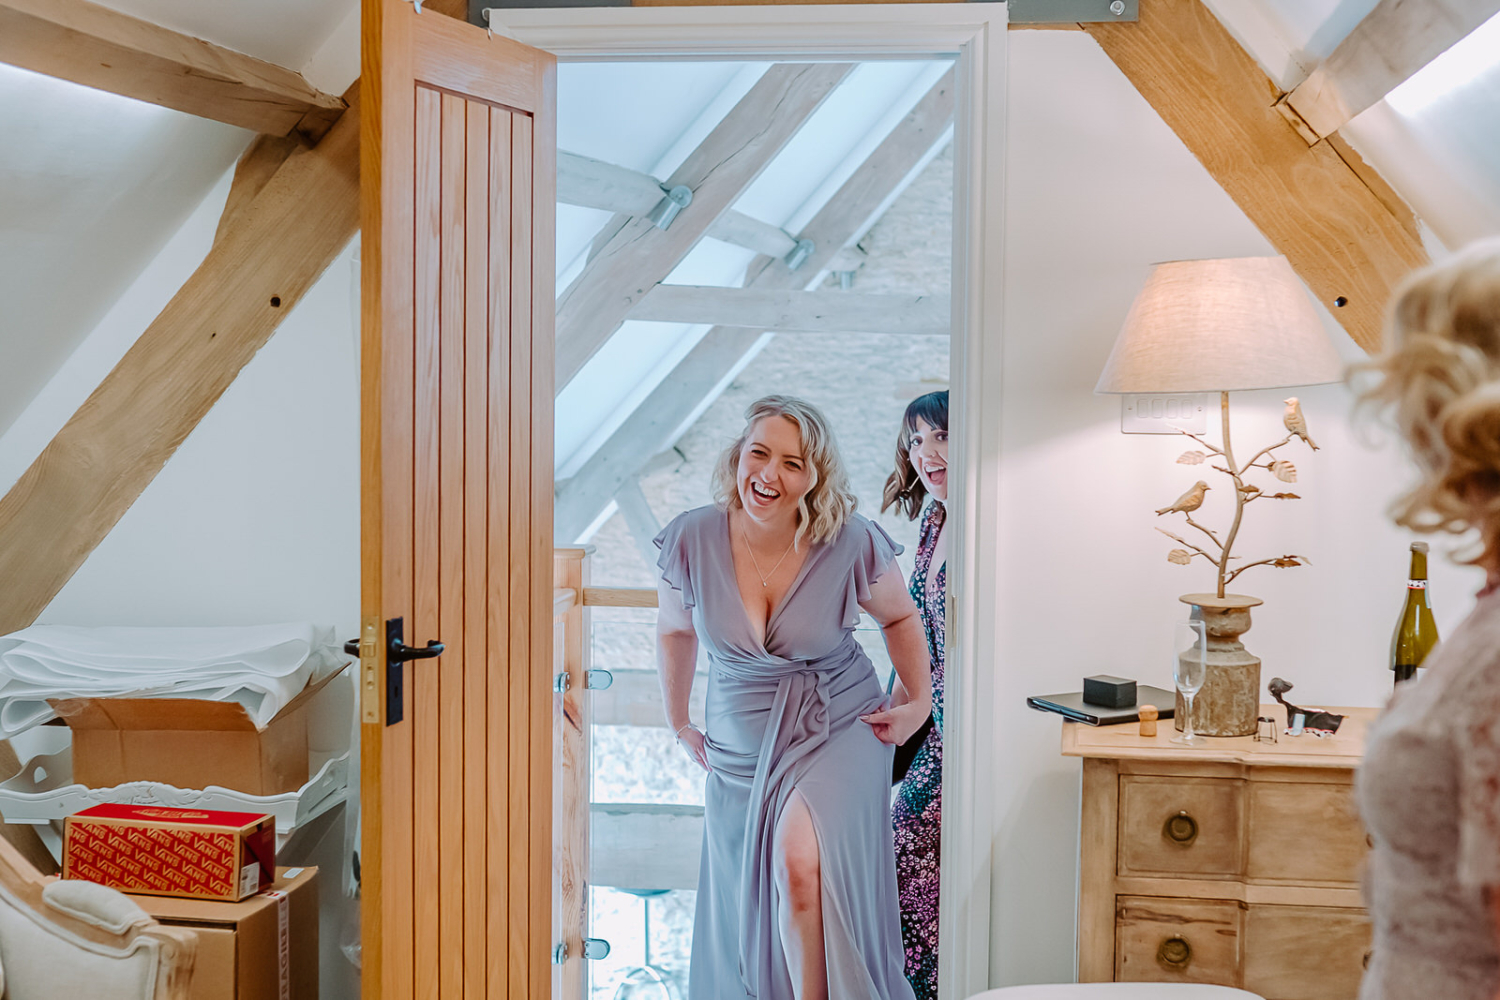 Bridesmaids walks through the door exited to see the bride in her dress 